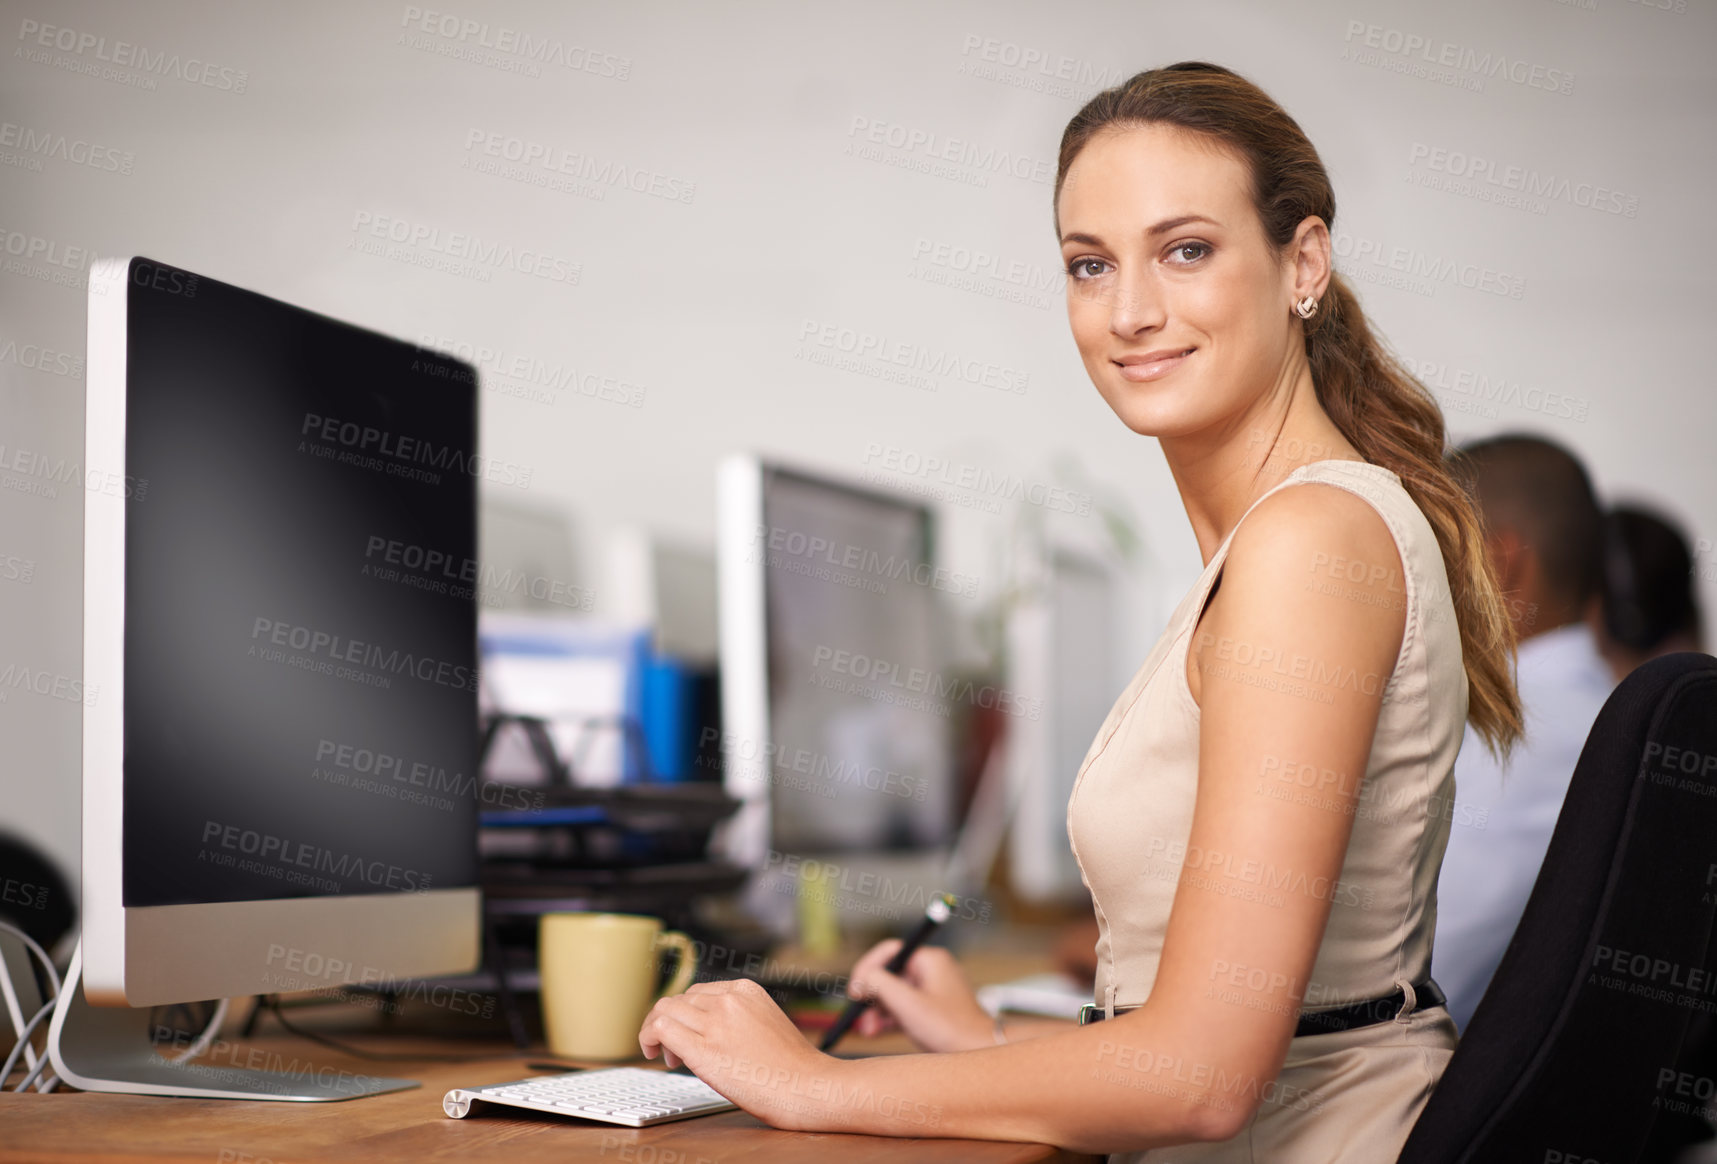 Buy stock photo Portrait of an attractive young office worker at her computer